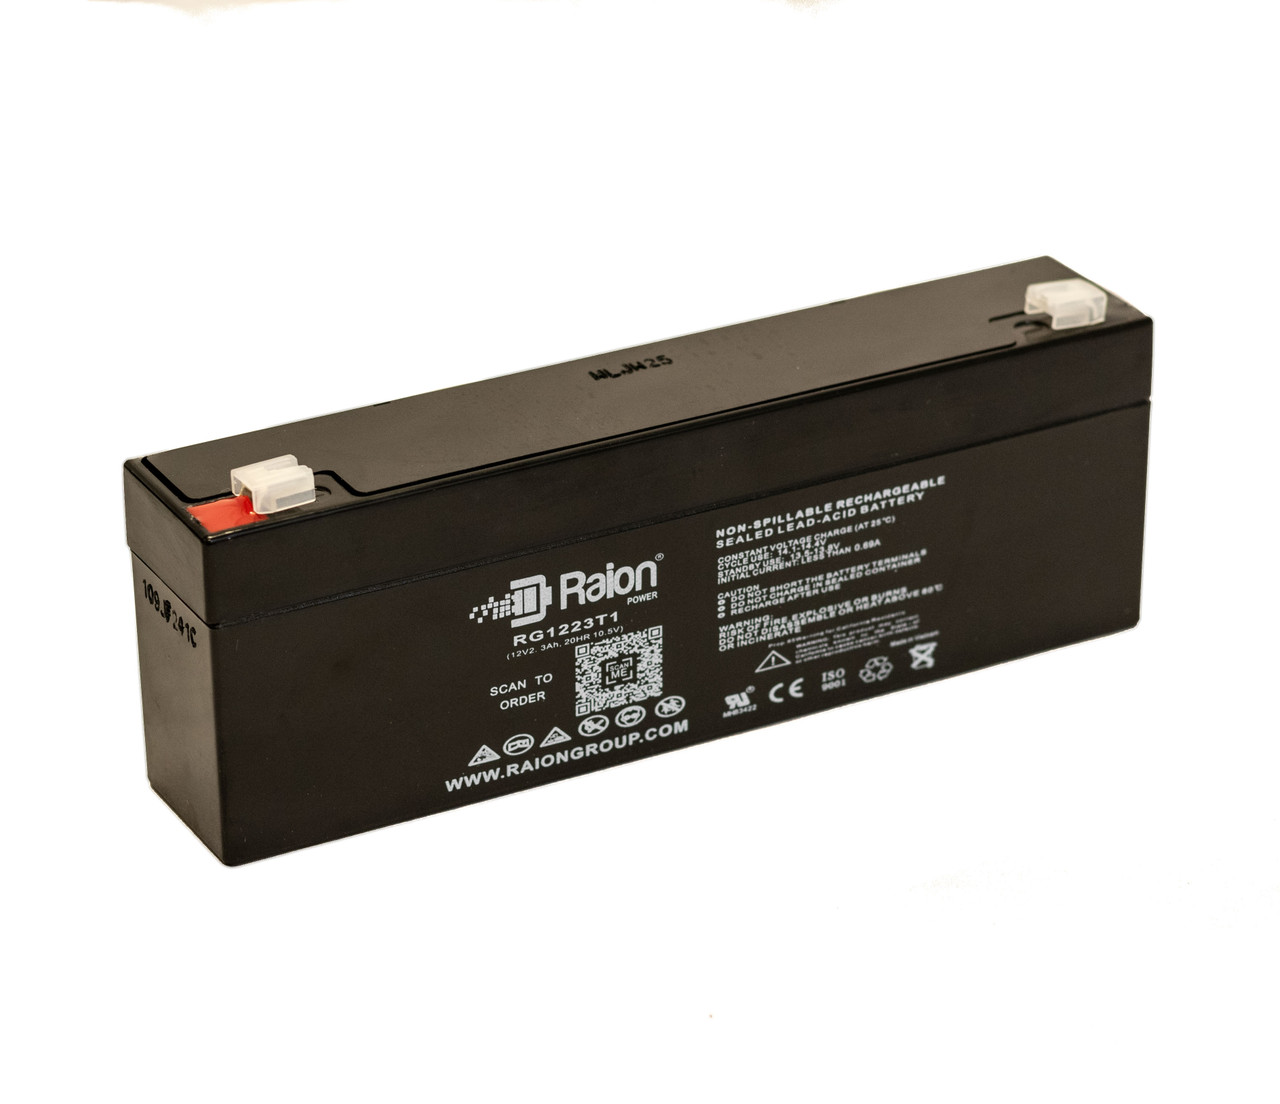 Raion Power RG1223T1 Replacement Battery for Union PW1202